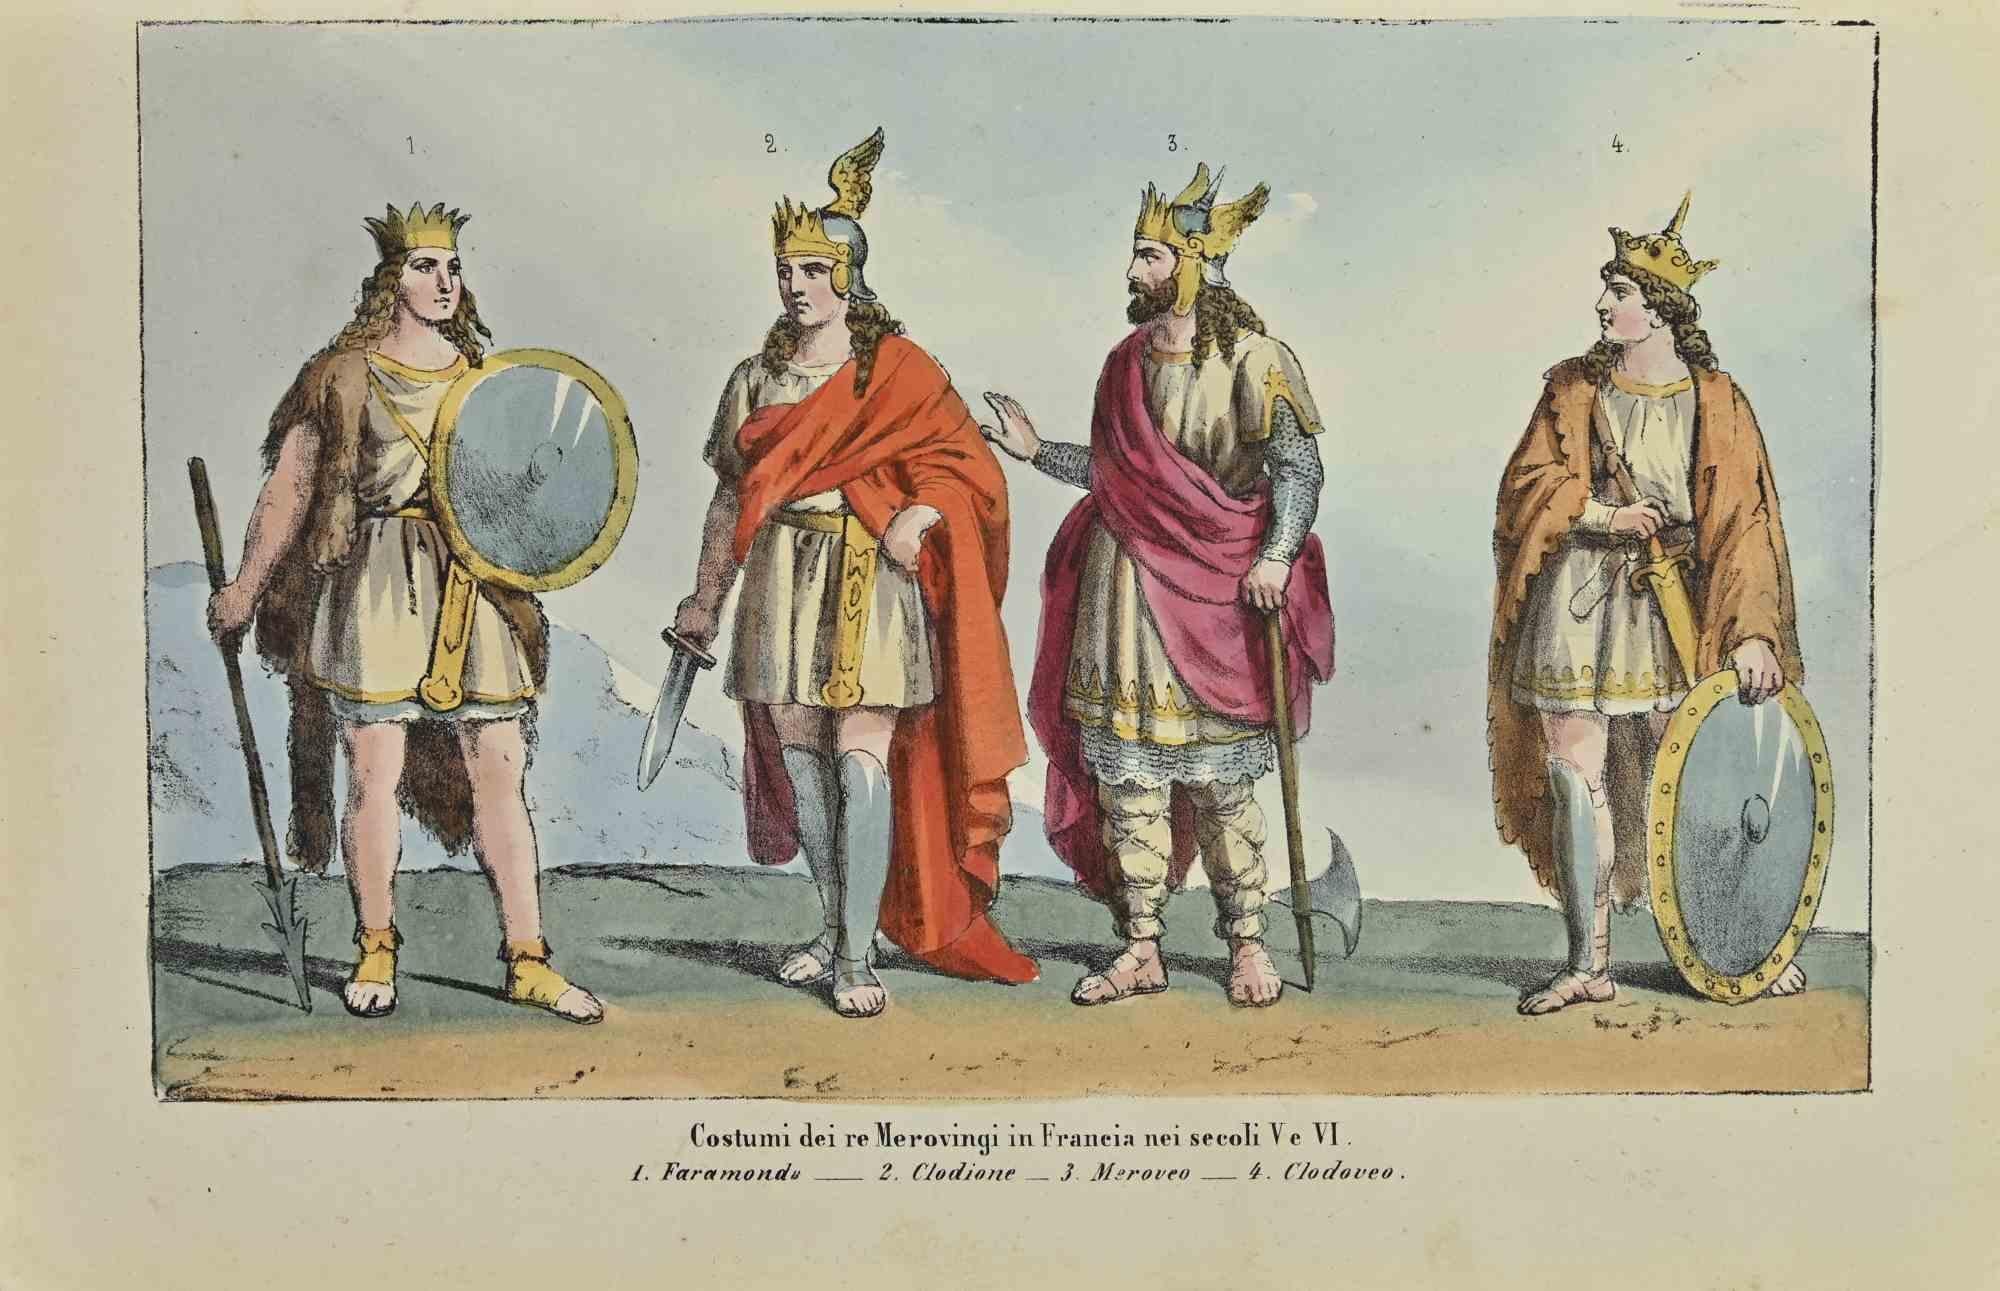 Customs of the Merovingian kings in France in the 5th and 6th centuries is a lithograph made by Auguste Wahlen in 1844.

Hand colored.

Good condition.

At the center of the artwork is the original title "Costumi dei re Merovingi in Francia nei